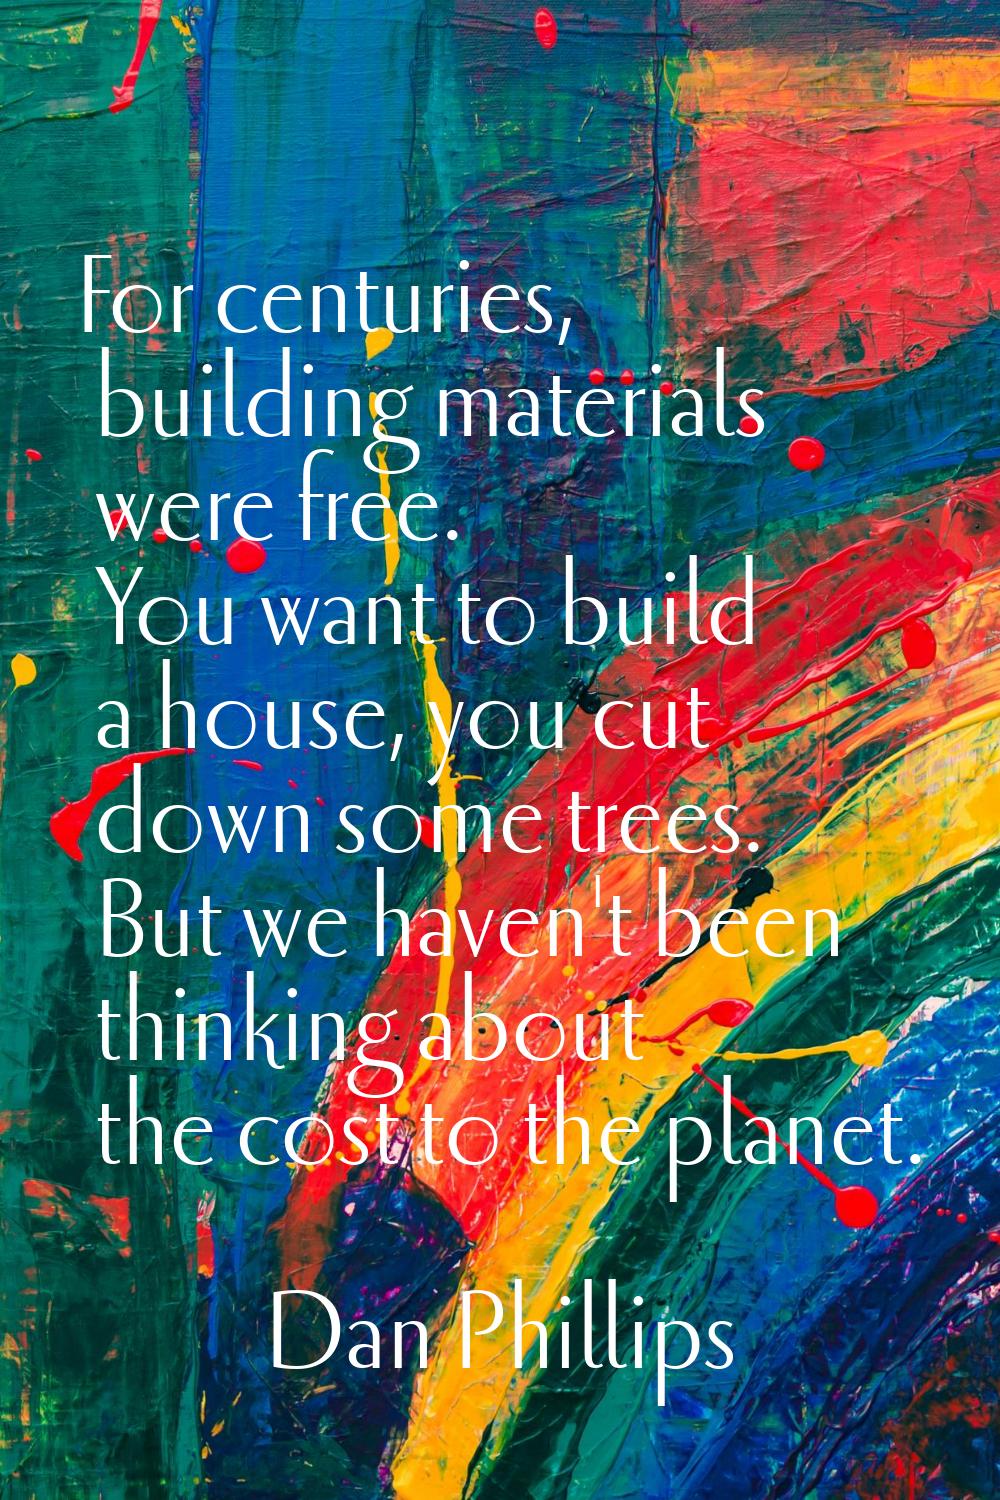 For centuries, building materials were free. You want to build a house, you cut down some trees. Bu